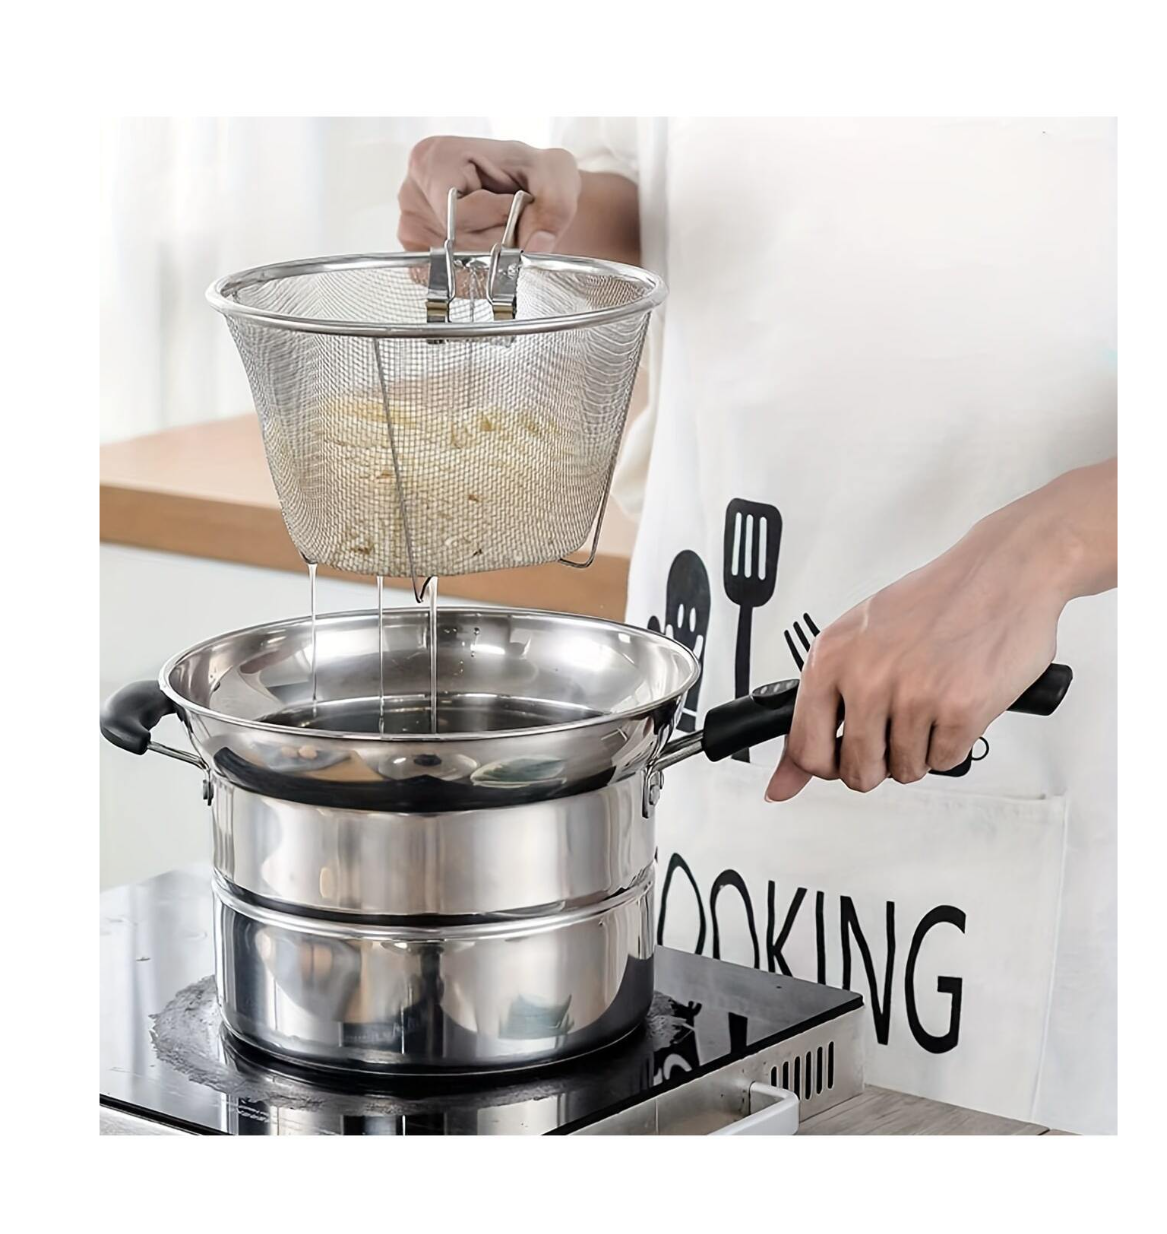 Master the Art of Crispy Delights: Stainless Steel Kitchen Deep Frying Basket with Fine Mesh Spider Strainer – Your Culinary Wingman for Perfectly Fried Chicken, Dumplings, Noodles, and More!